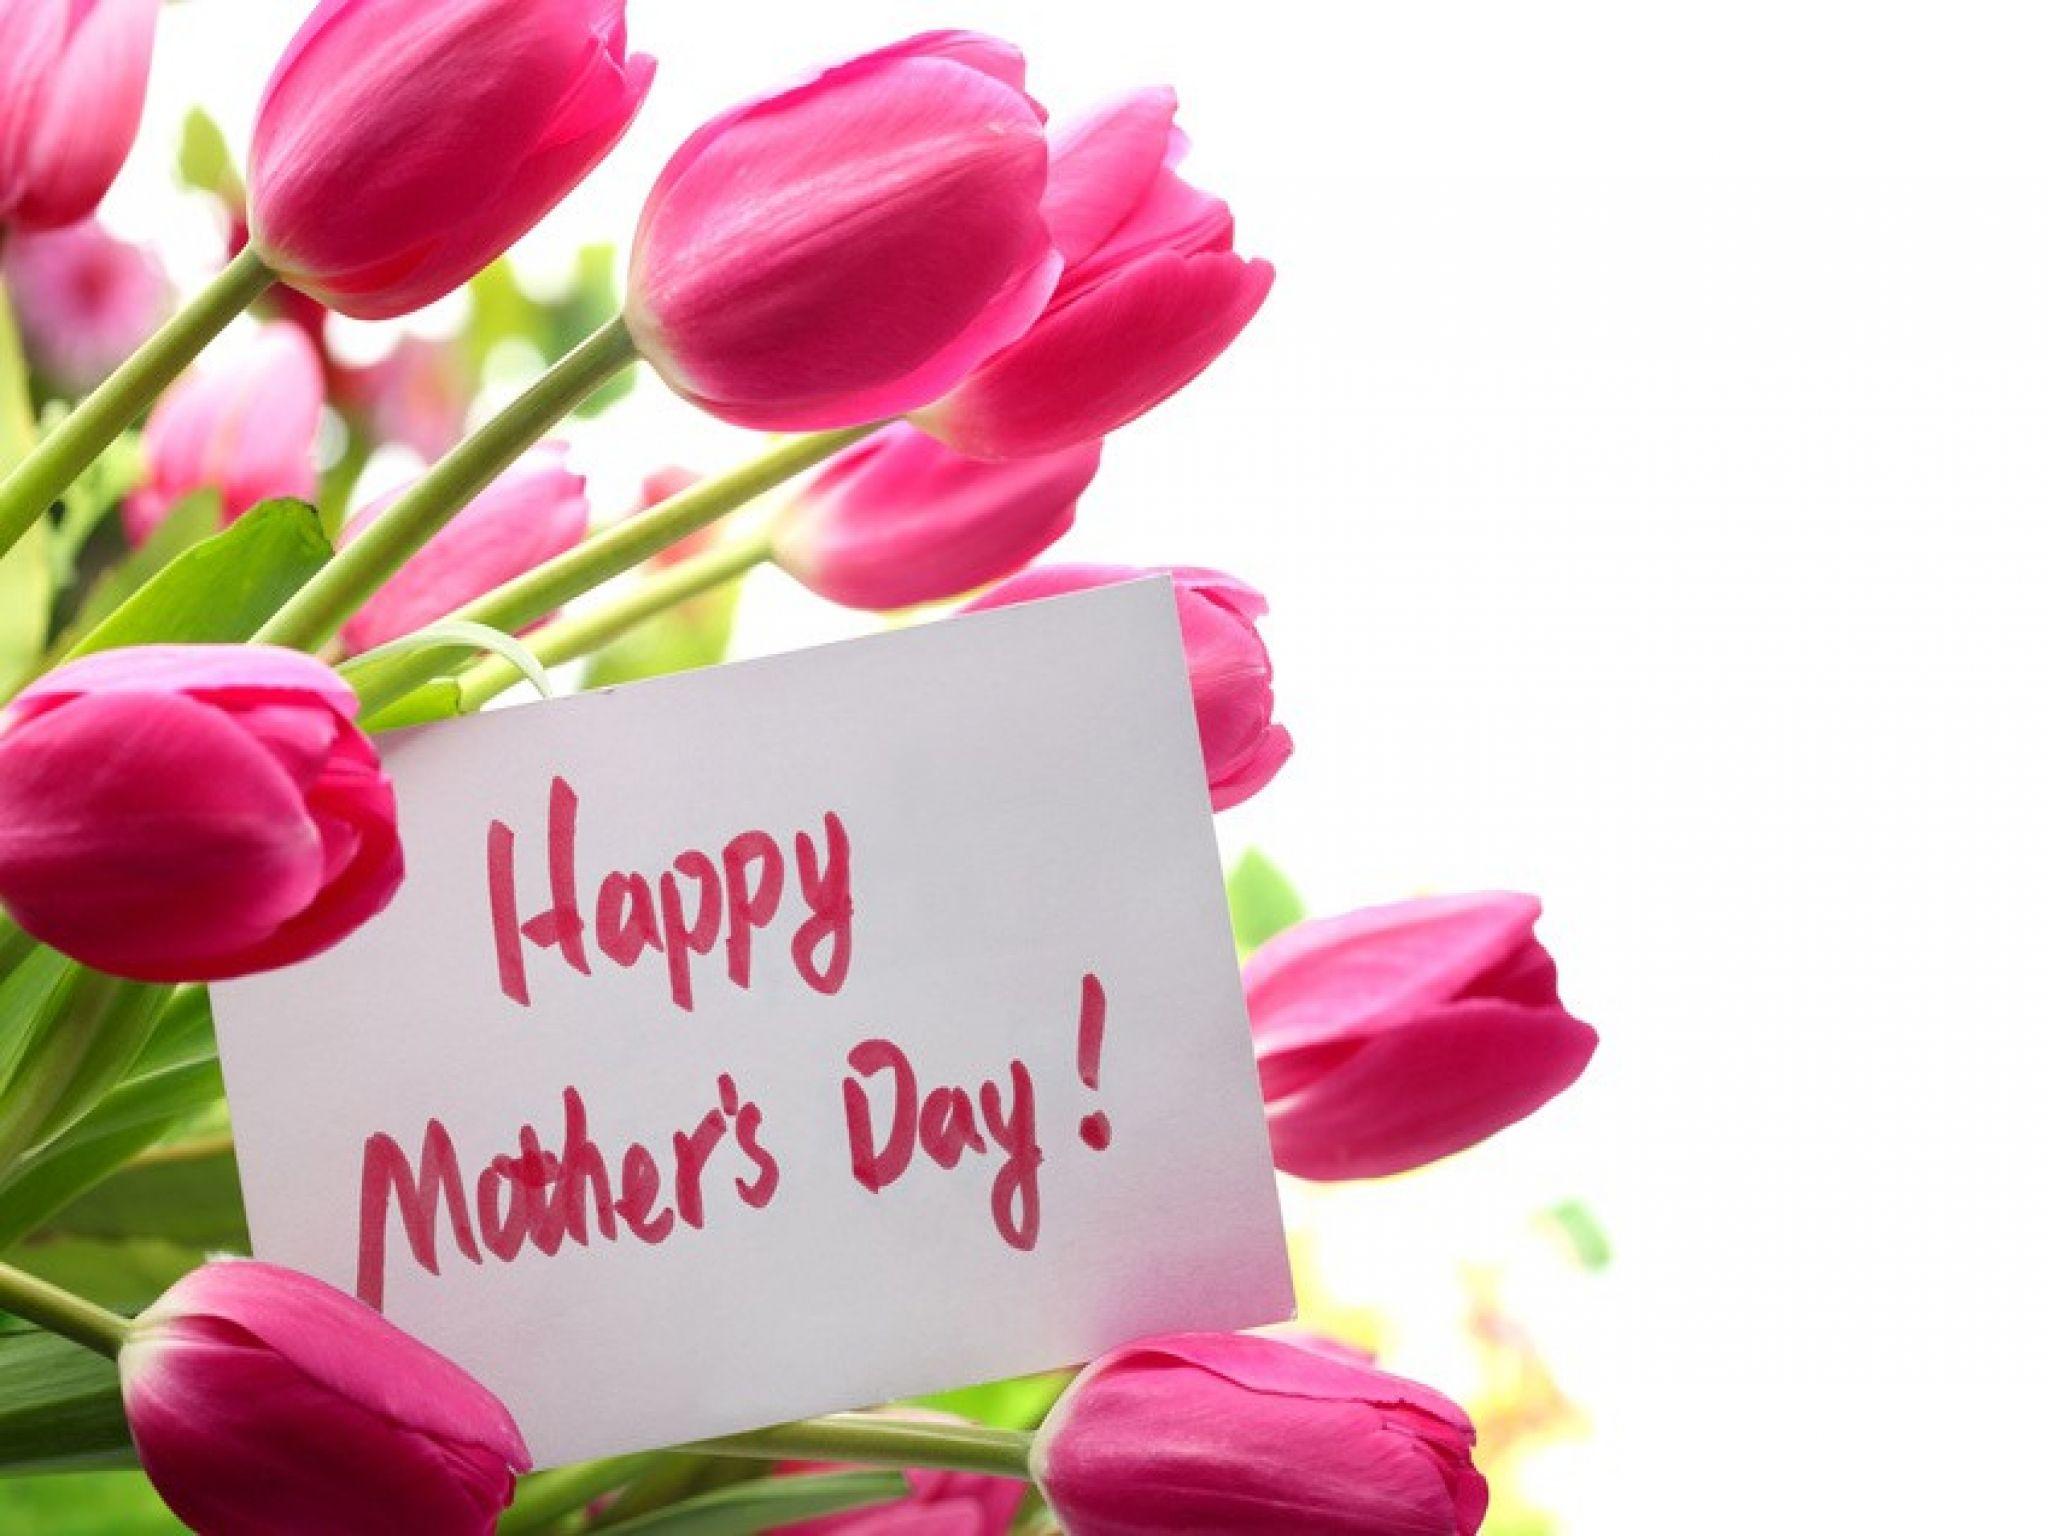 Mothers Day Wallpaper Free Download